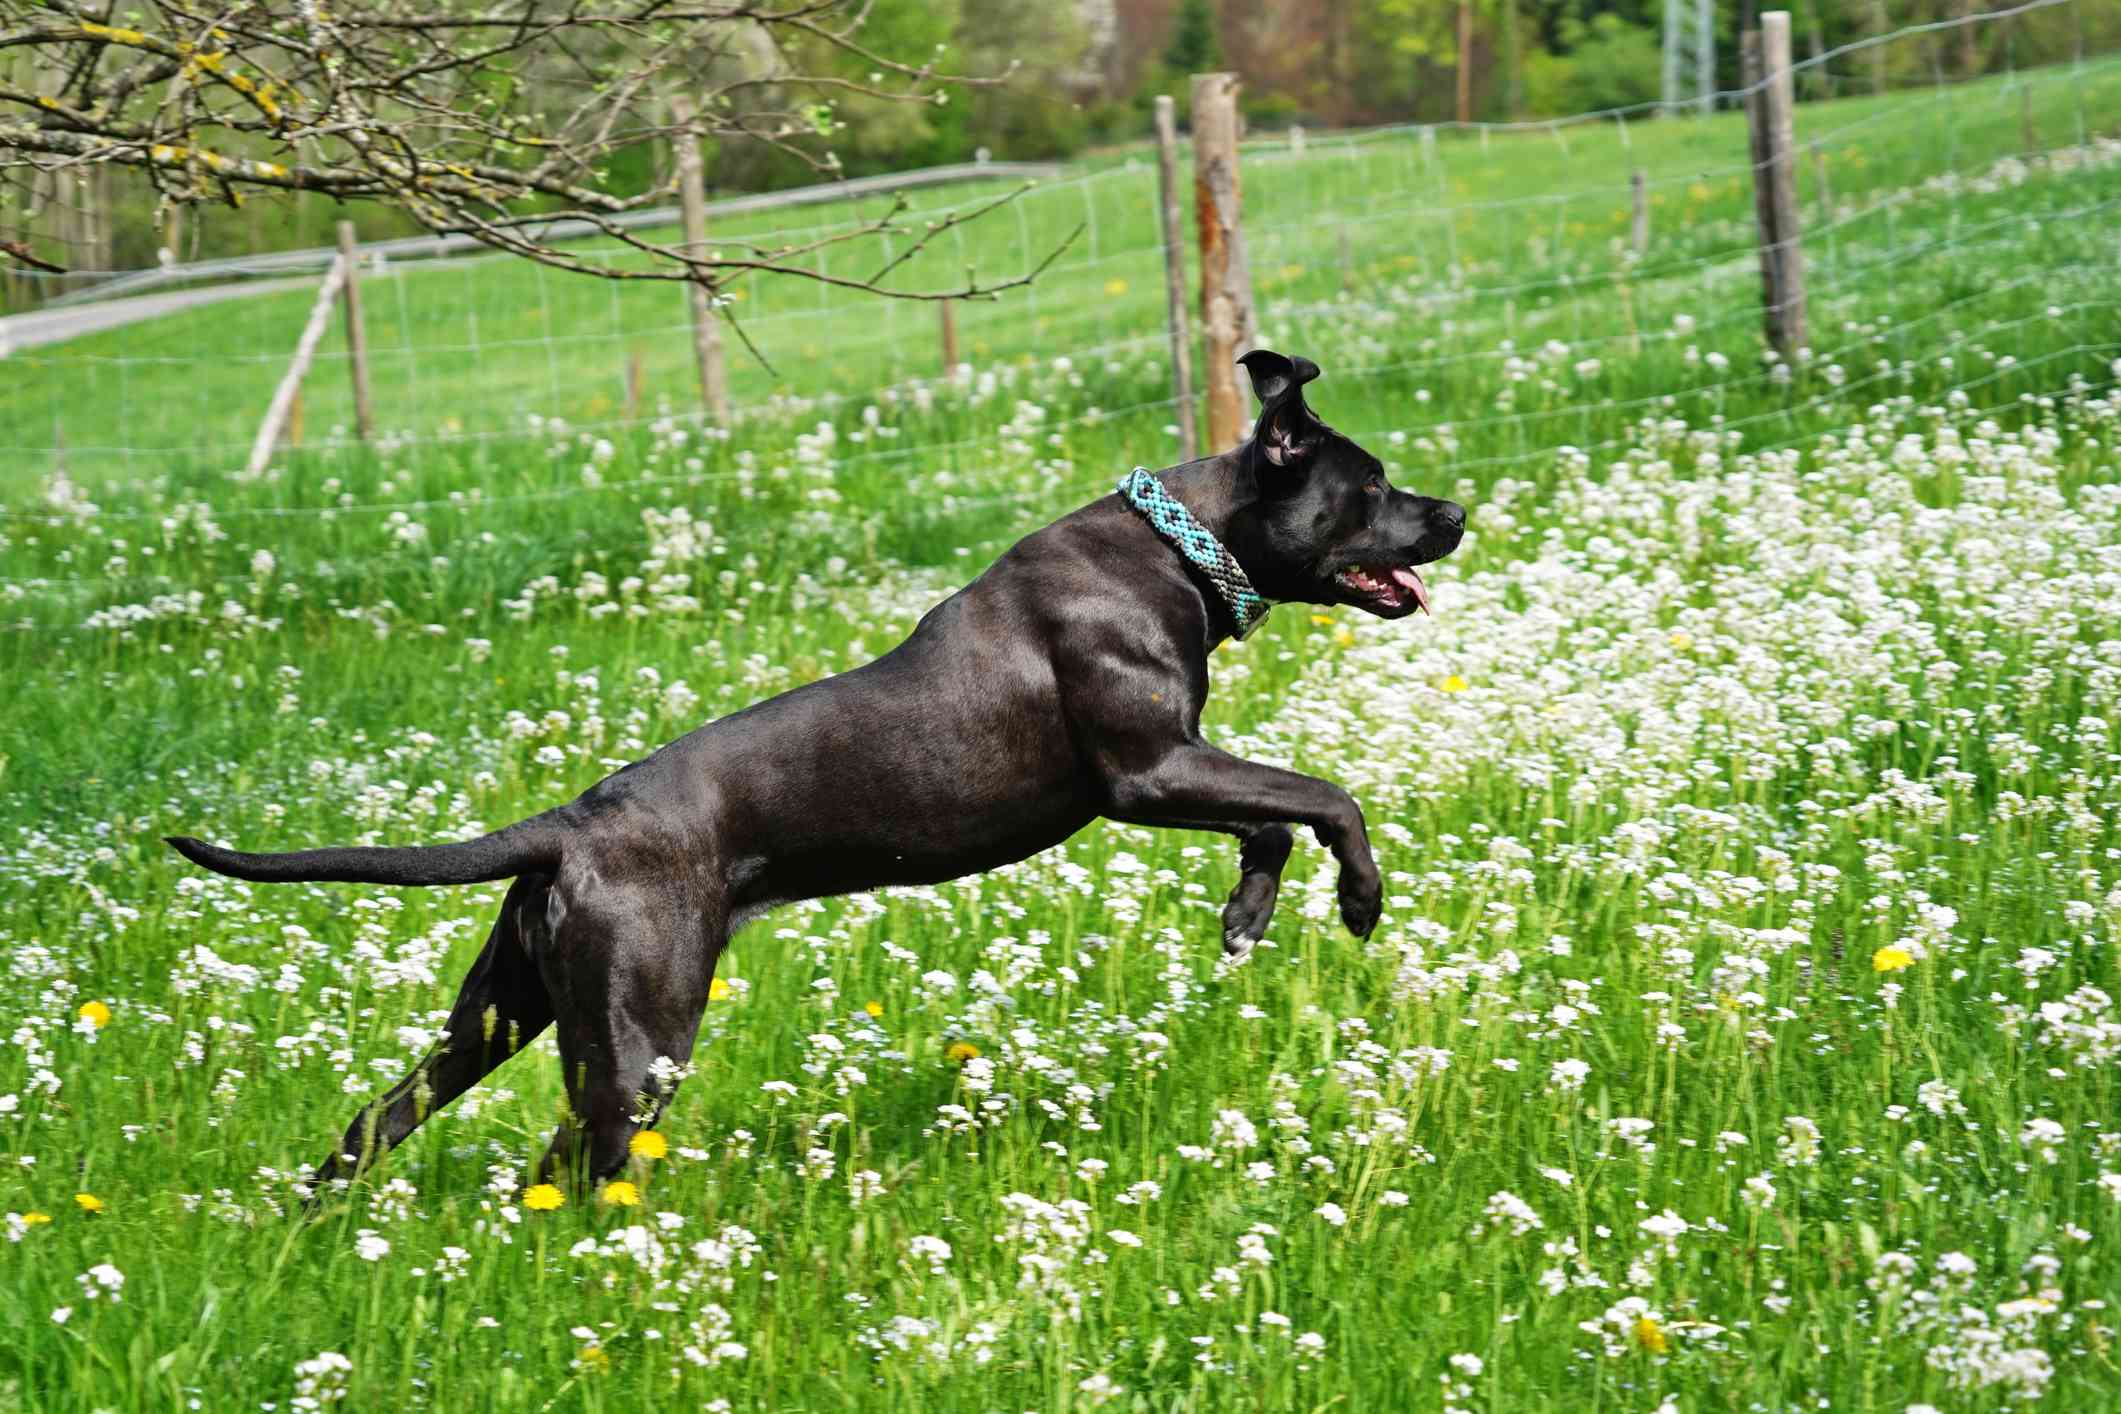 Cane Corso jumping in fenced yard